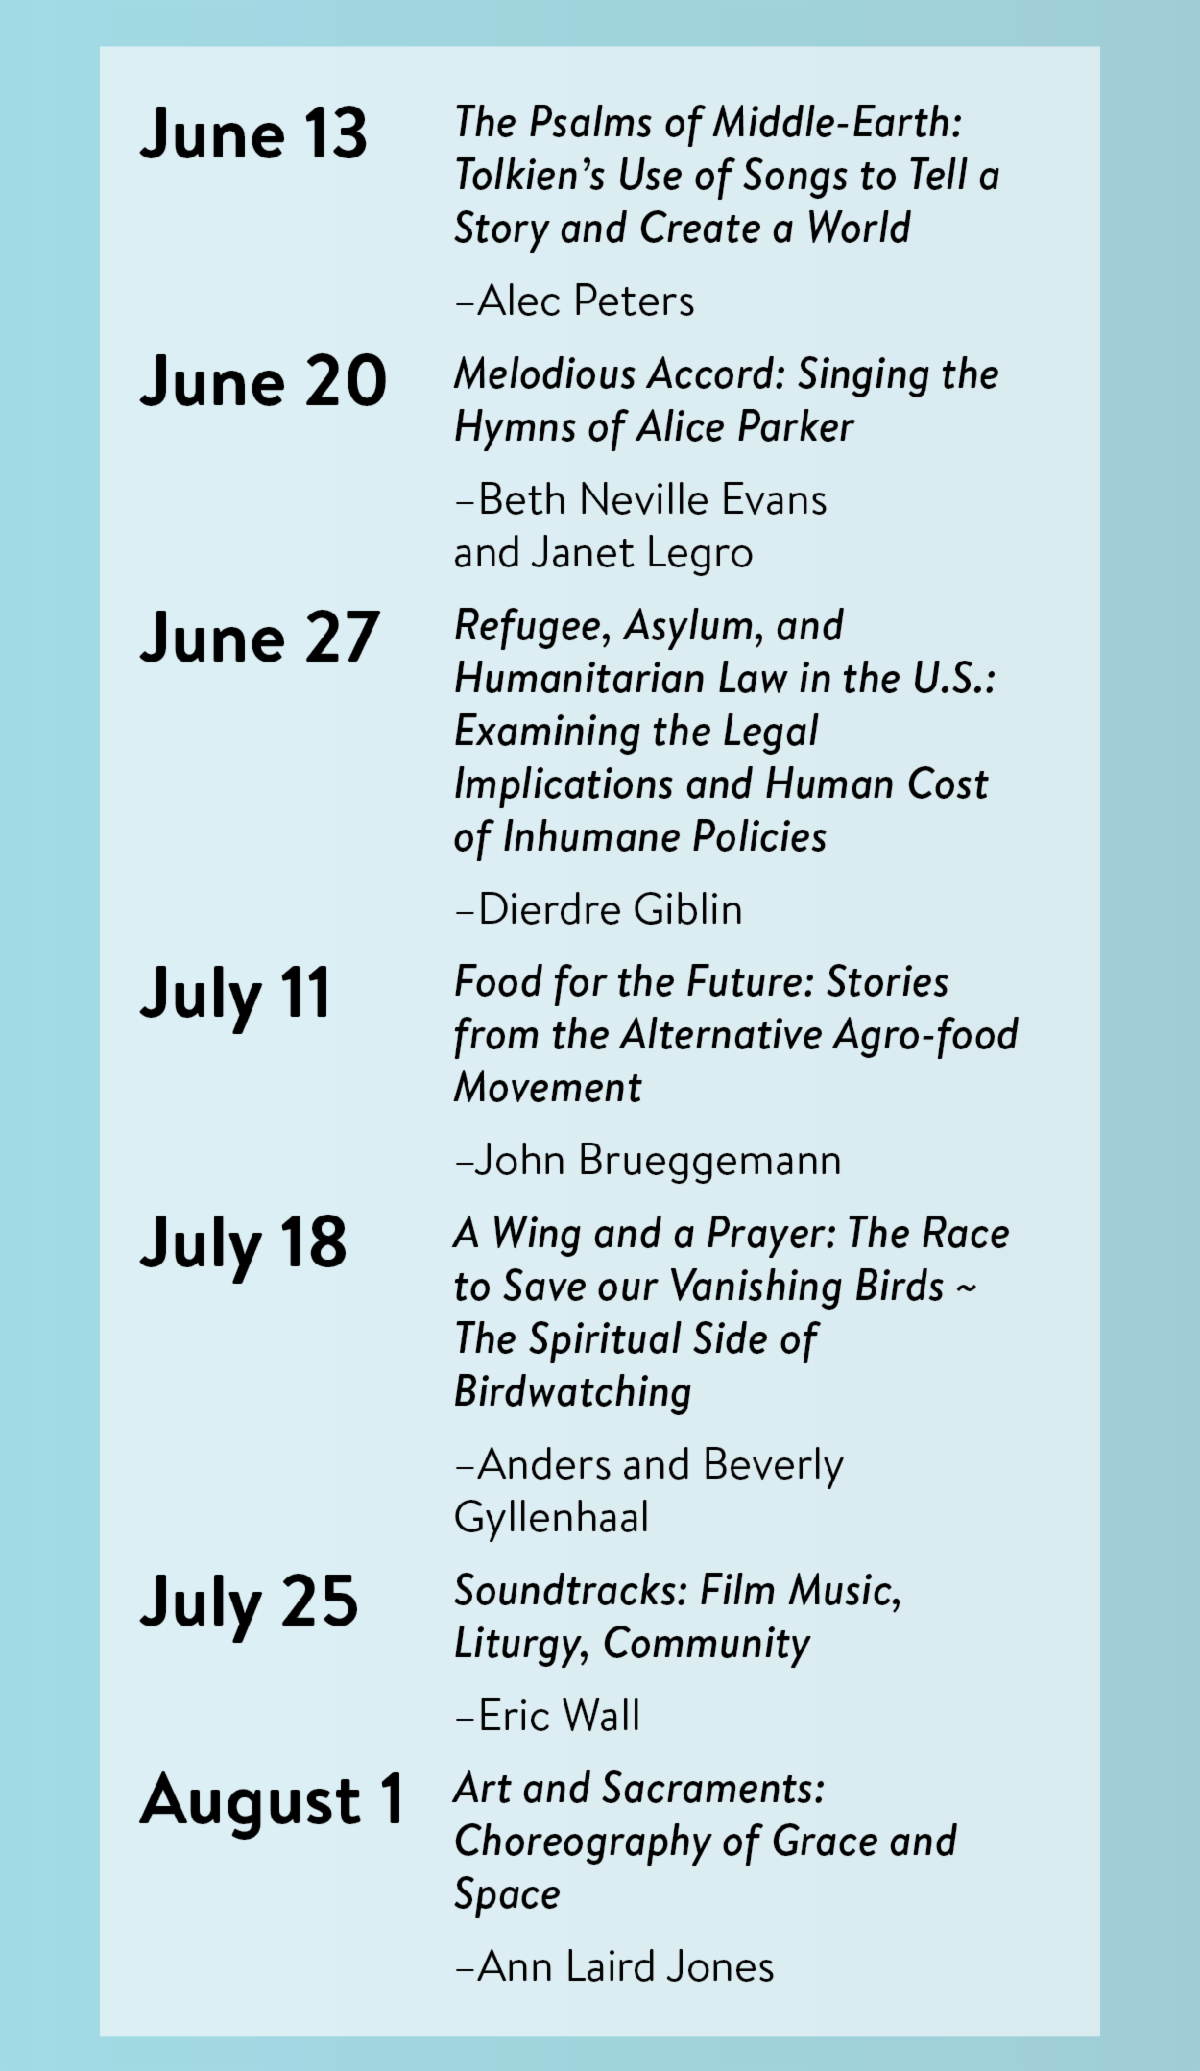 June 13 - "The Psalms of Middle-Earth: Tolkien’s Use of Songs to Tell a Story and Create a World" by Alec Peters, June 20 - "Melodious Accord: Singing the Hymns of Alice Parker" by Beth Neville Evans and Janet Legro, June 27 - "Refugee, Asylum, and Humanitarian Law in the U.S.: Examining the Legal Implications and Human Cost of Inhumane Policies" by Dierdre Giblin, July 11 - "Food for the Future: Stories from the Alternative Agro-food Movement" by John Brueggemann, July 18 - "A Wing and a Prayer: The Race to Save our Vanishing Birds ~ The Spiritual Side of Birdwatching" by Anders and Beverly Gyllenhaal, July 25 - "Soundtracks: Film Music, Liturgy, Community" by Eric Wall, August 1 - "Art and Sacraments: Choreography of Grace and Space" by Ann Laird Jones